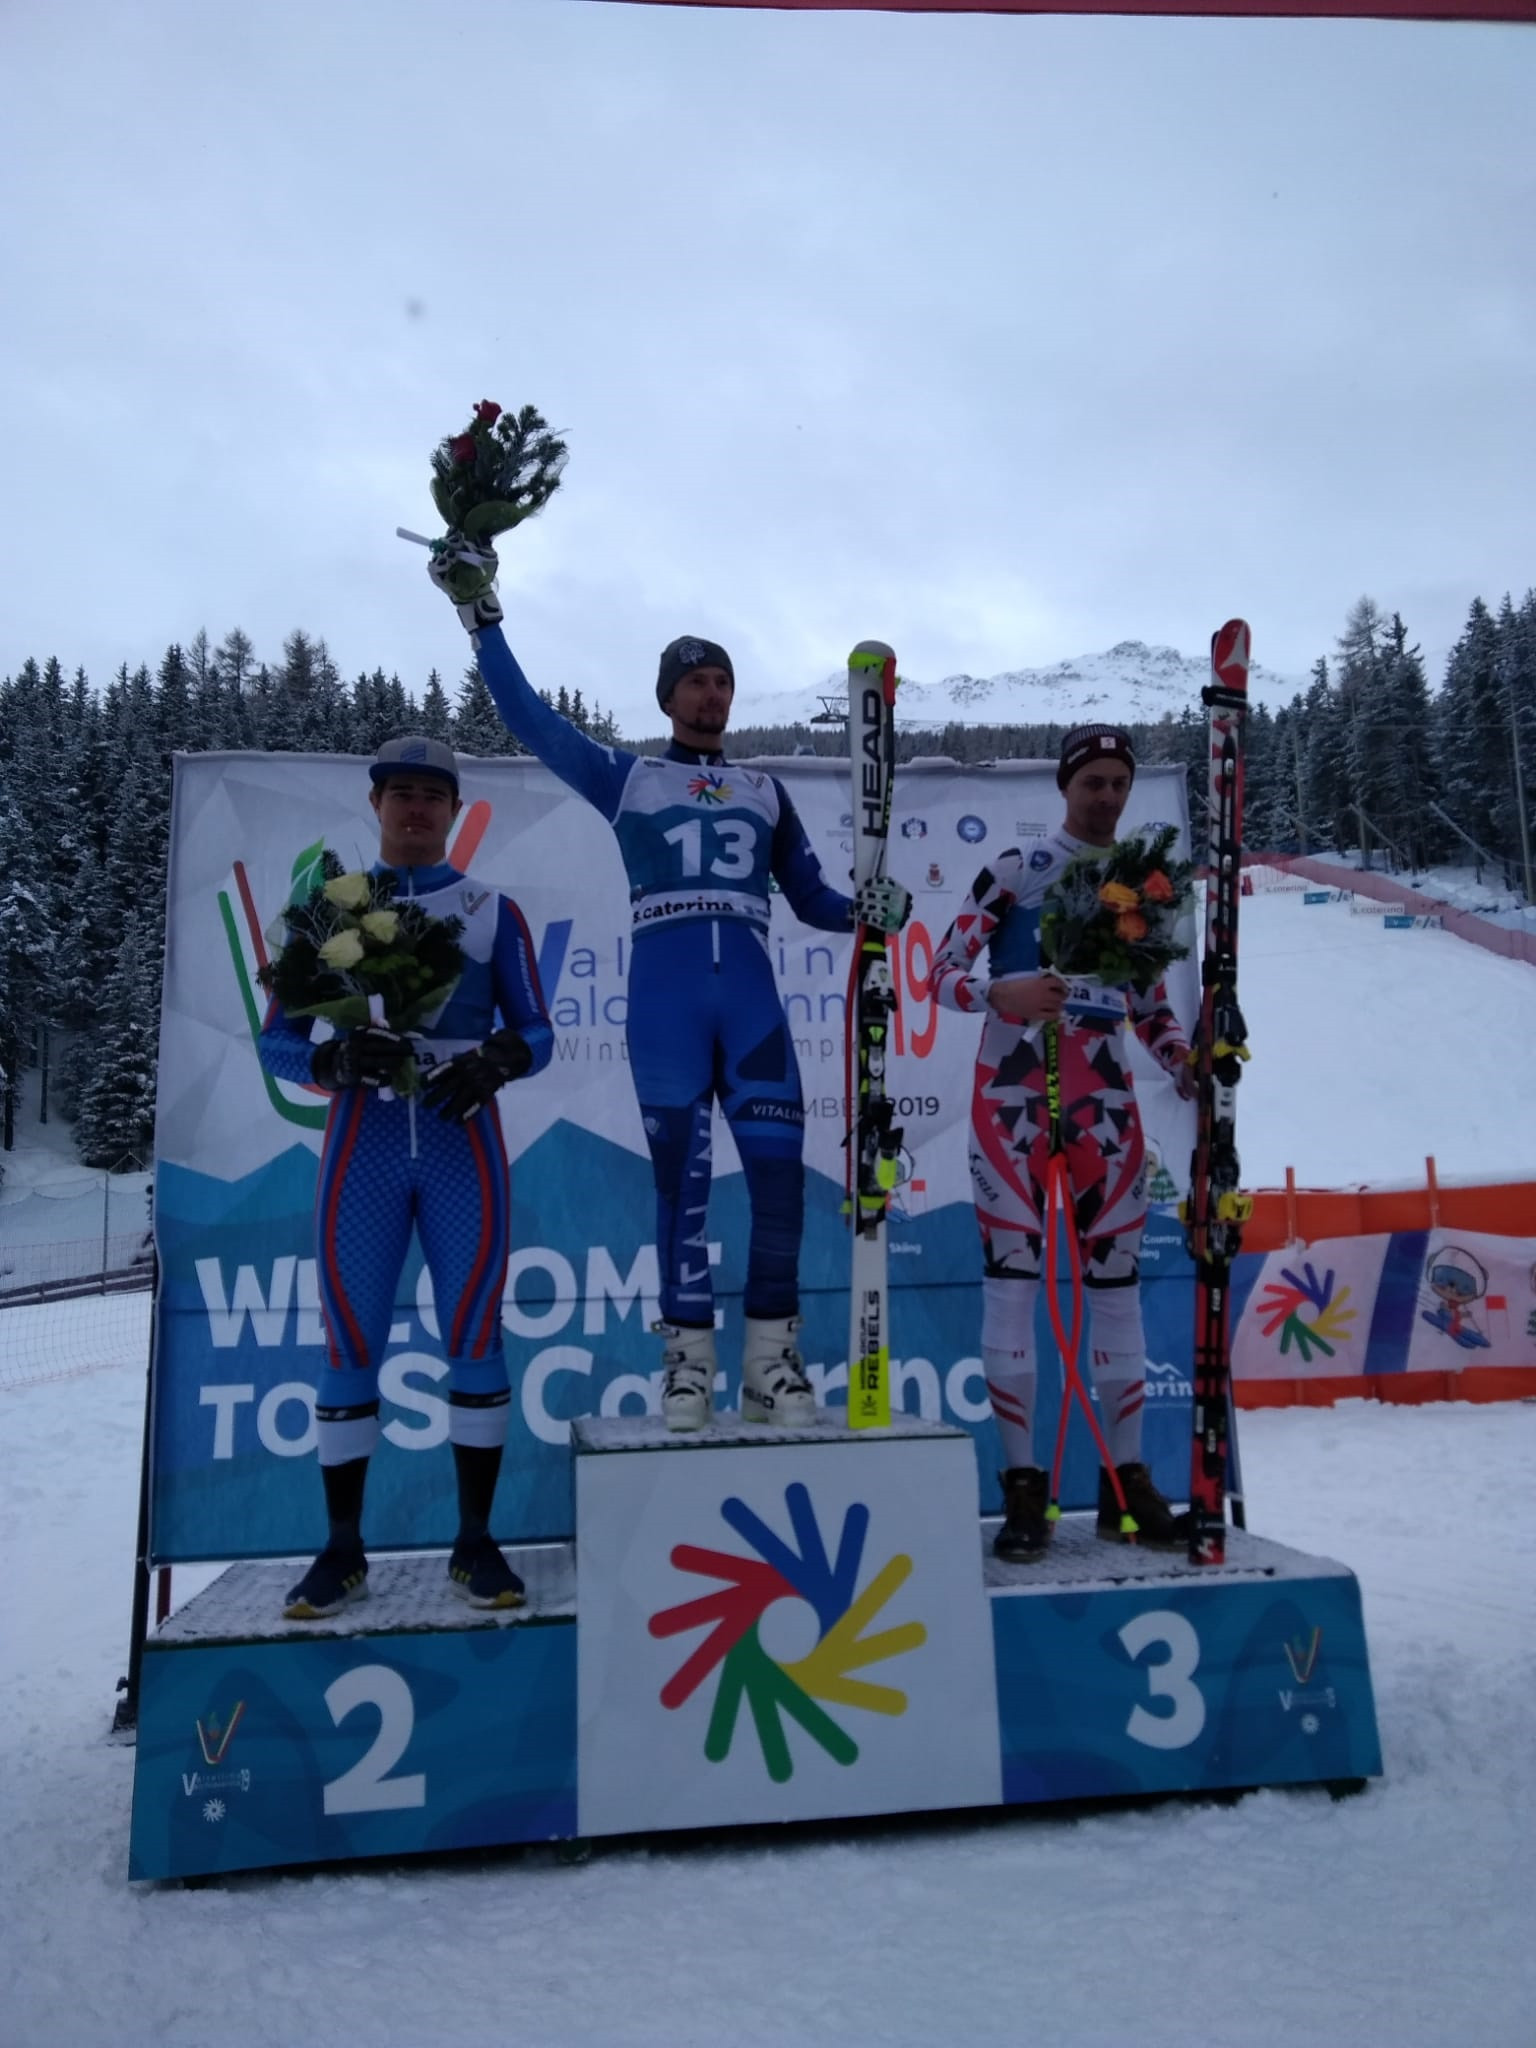 Italy's Giacomo Pierbon won the men's downhill skiing event at the Winter Deaflympics ©Deaflympics 2019